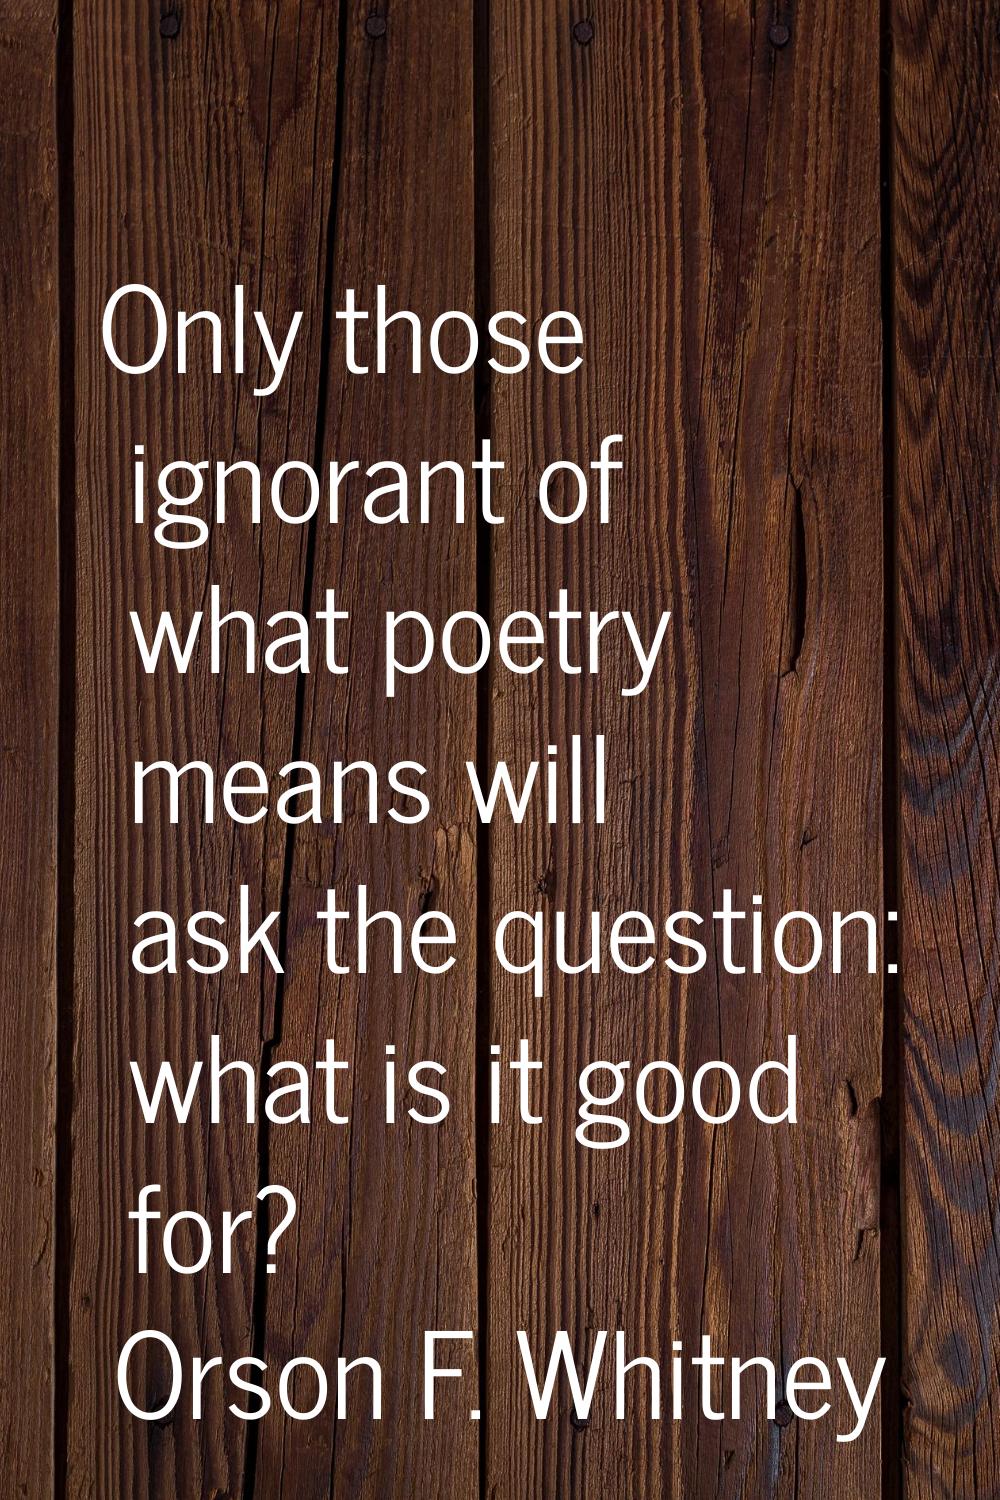 Only those ignorant of what poetry means will ask the question: what is it good for?